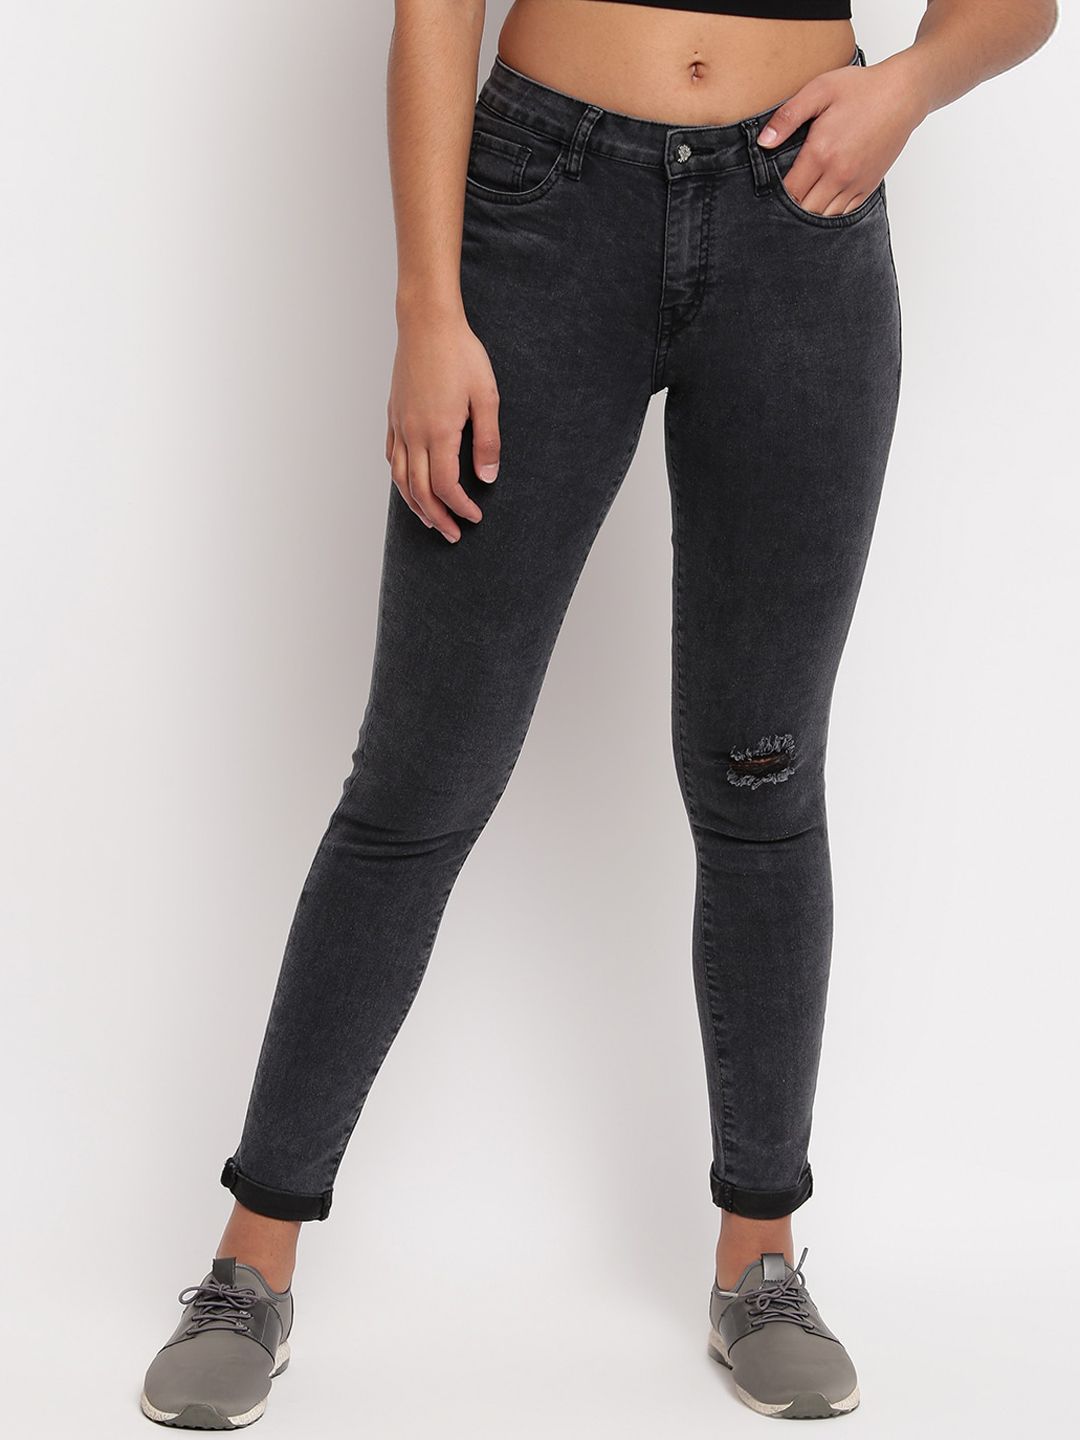 TALES & STORIES Women Black Skinny Fit Mildly Distressed Stretchable Jeans Price in India